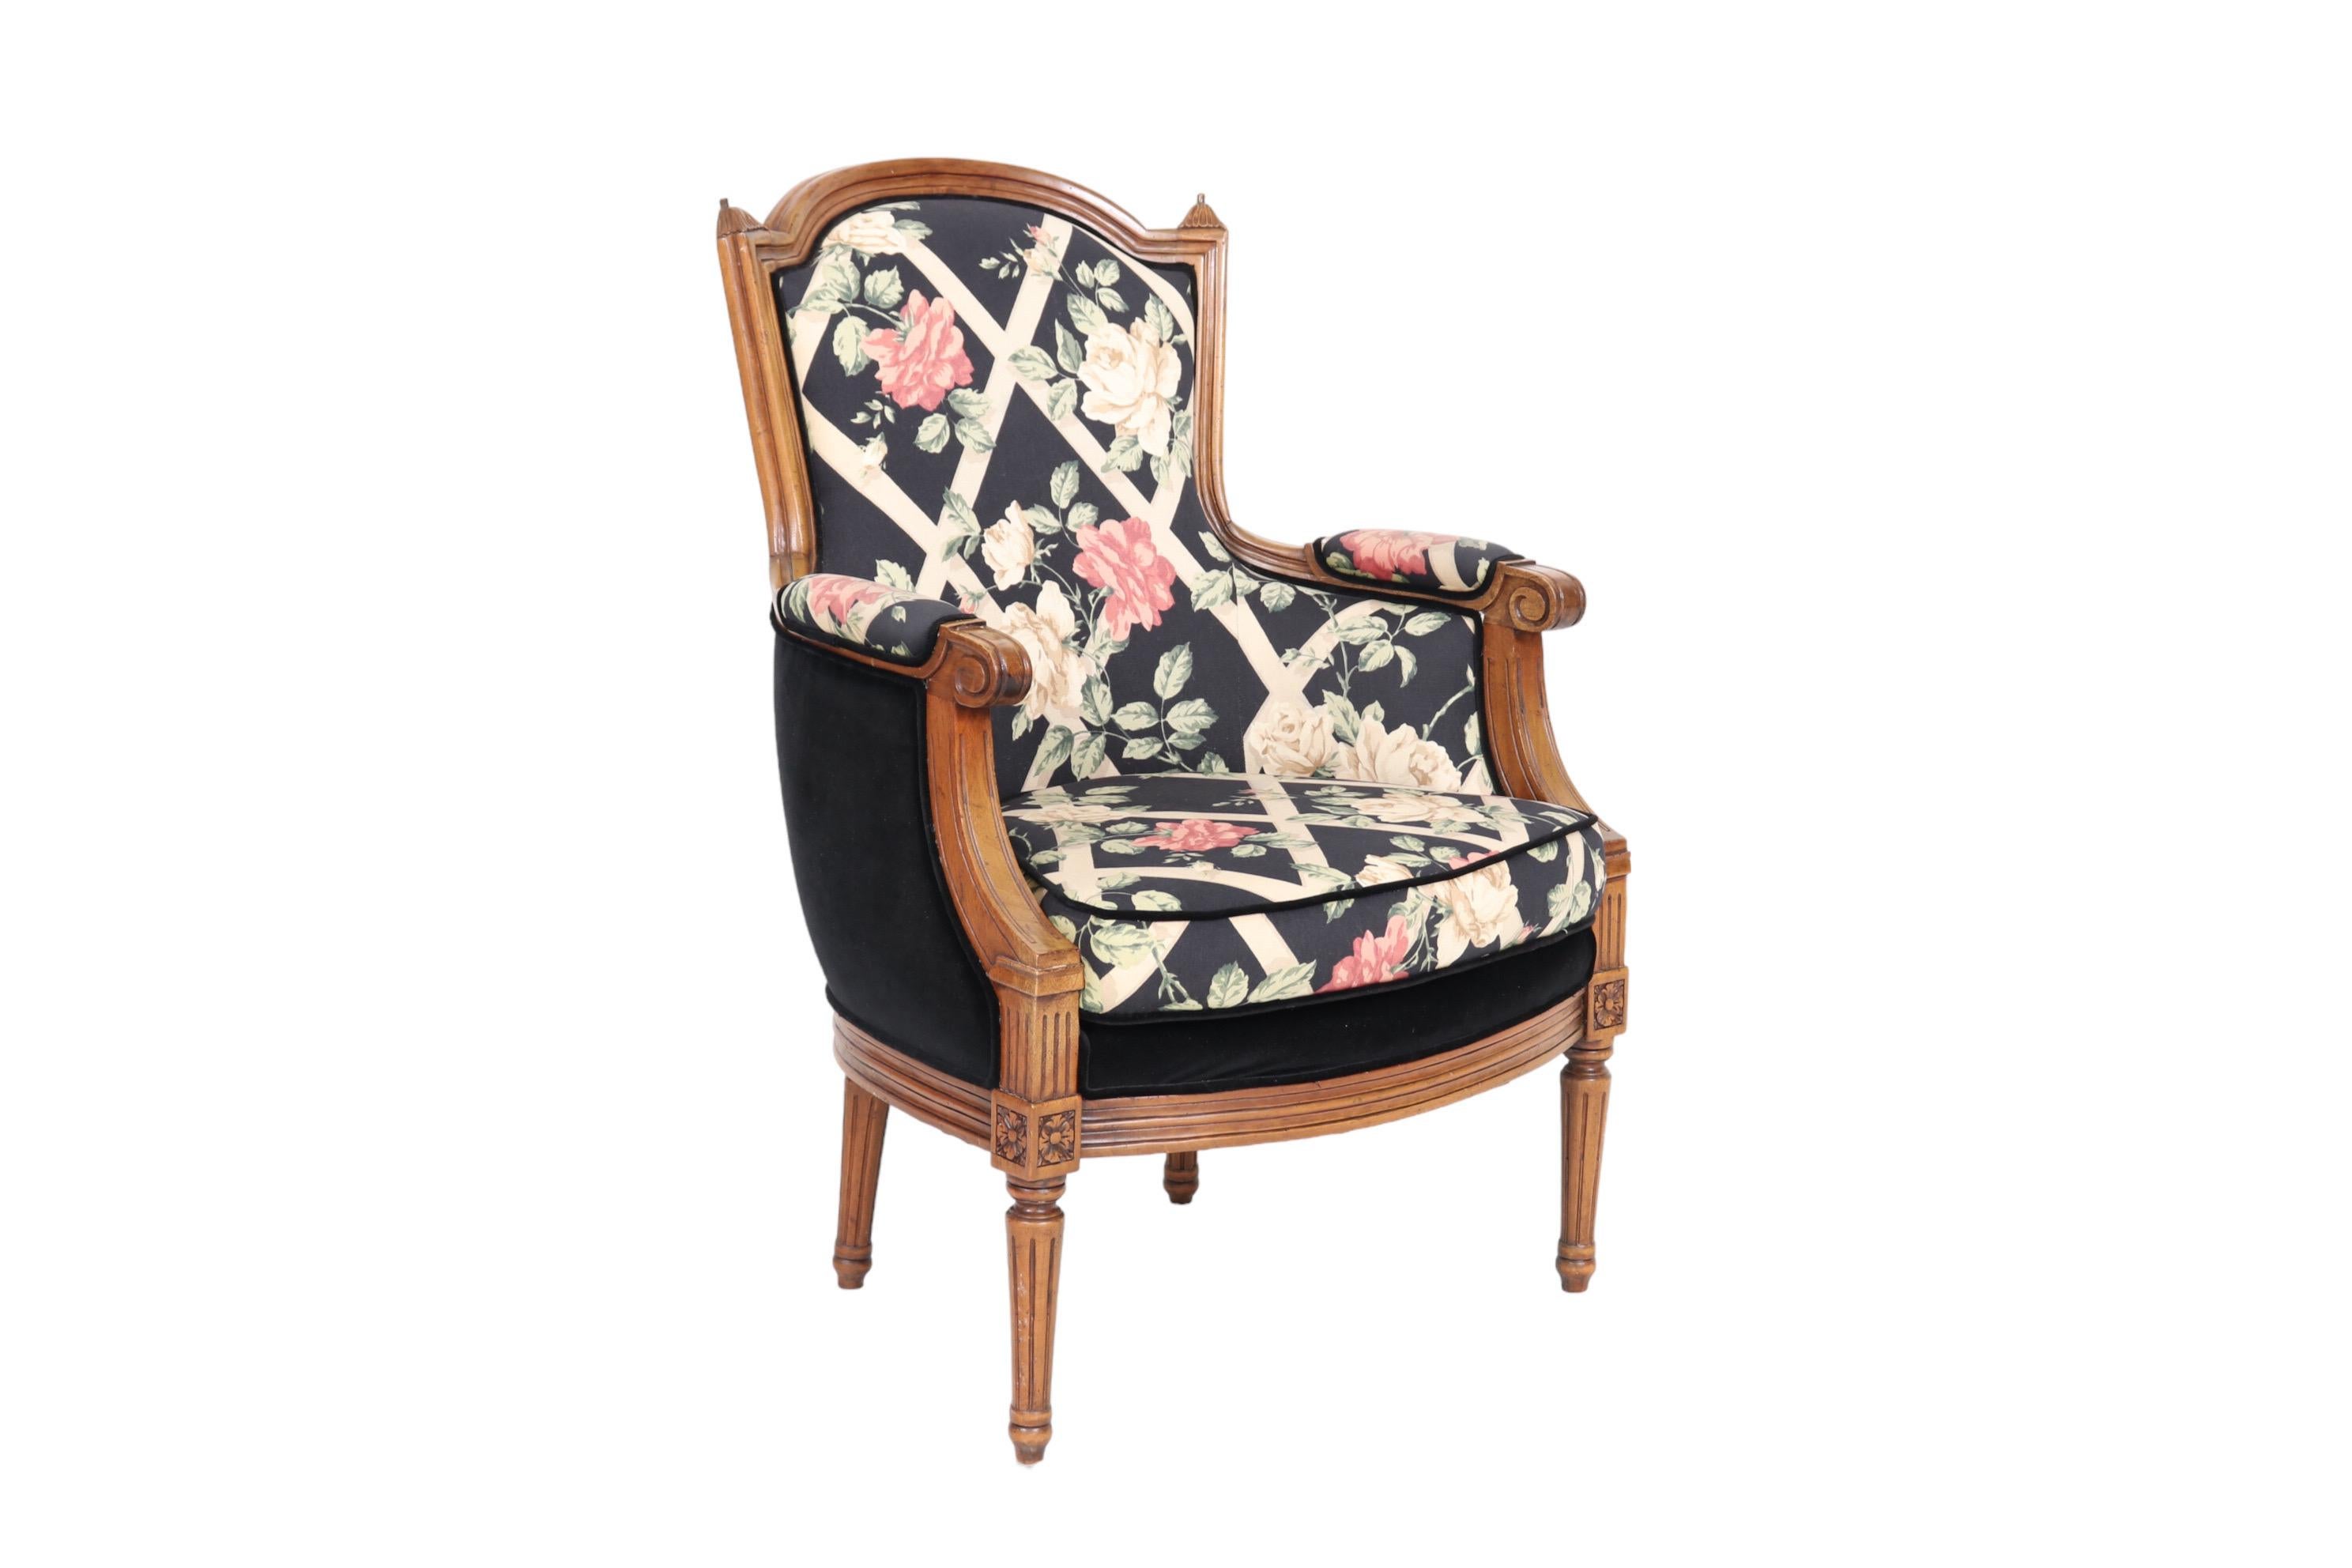 A Louis XVI style bergère armchair made of walnut. The frame is beveled throughout with foliate finials at each side of the crest rail. Cushioned arms terminate in scrolled hand holds and rosettes in squares top fluted round tapered legs.